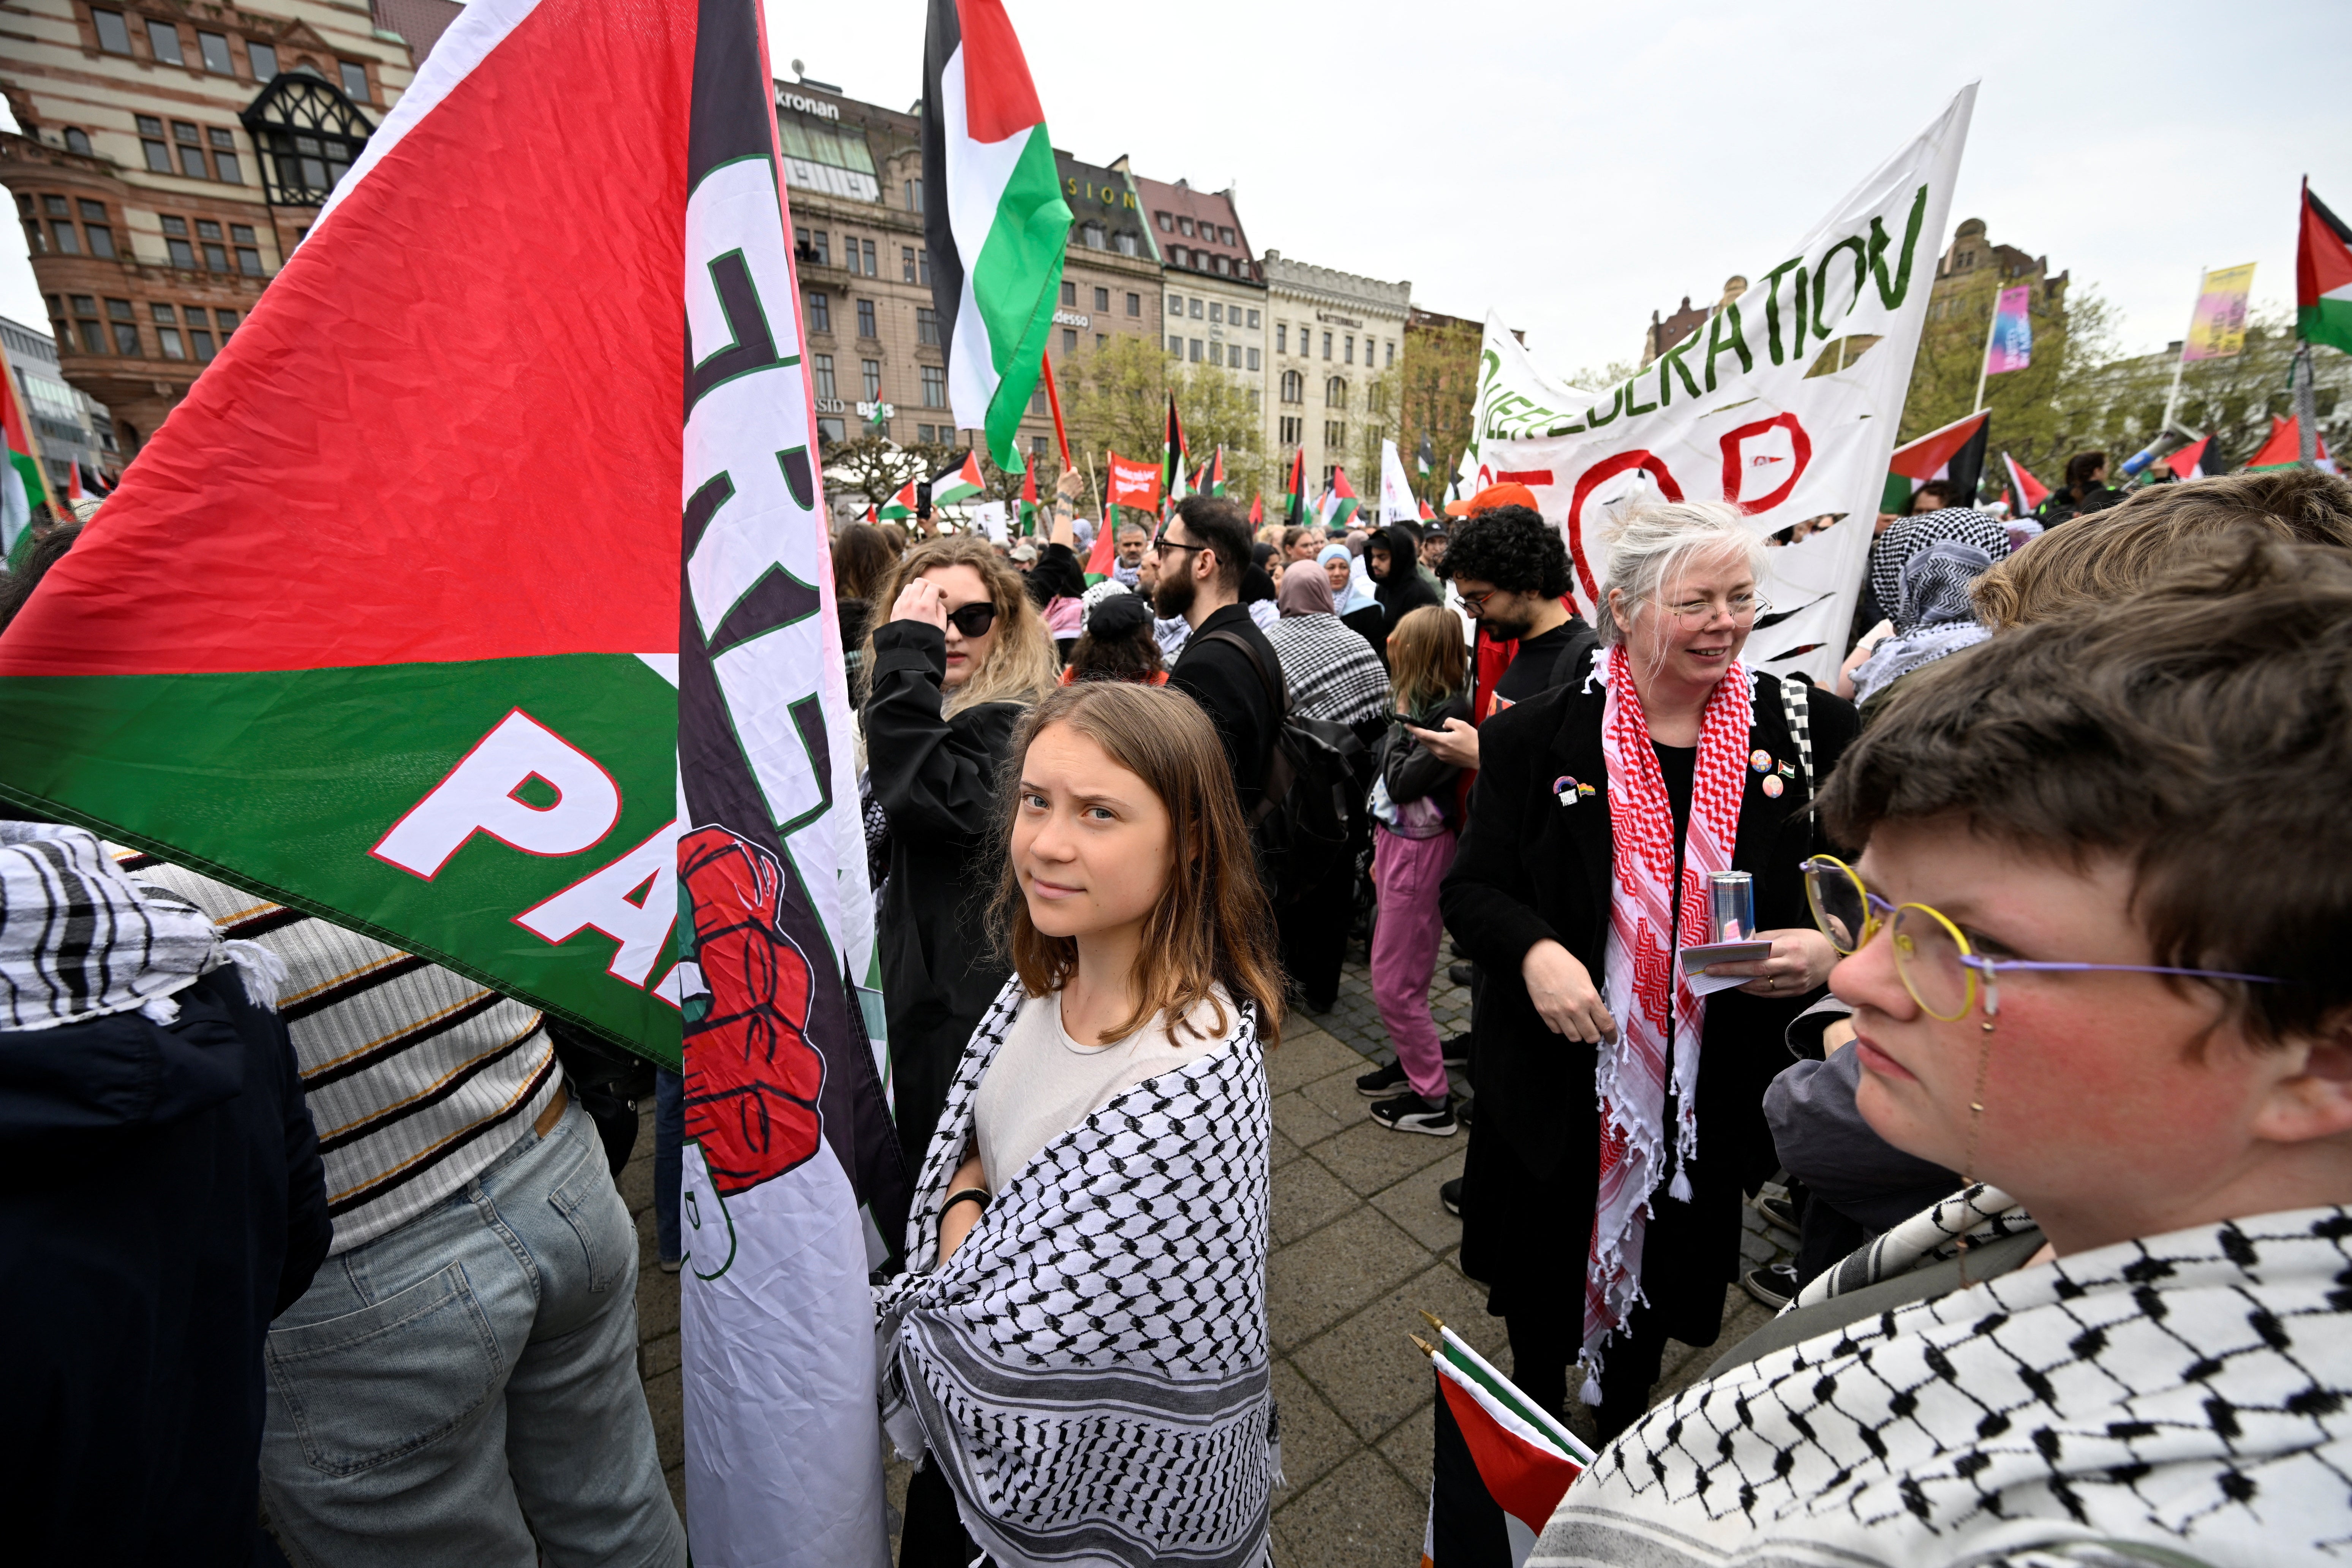 Climate activist Greta Thunberg takes part in the Stop Israel demonstration against Israel’s participation